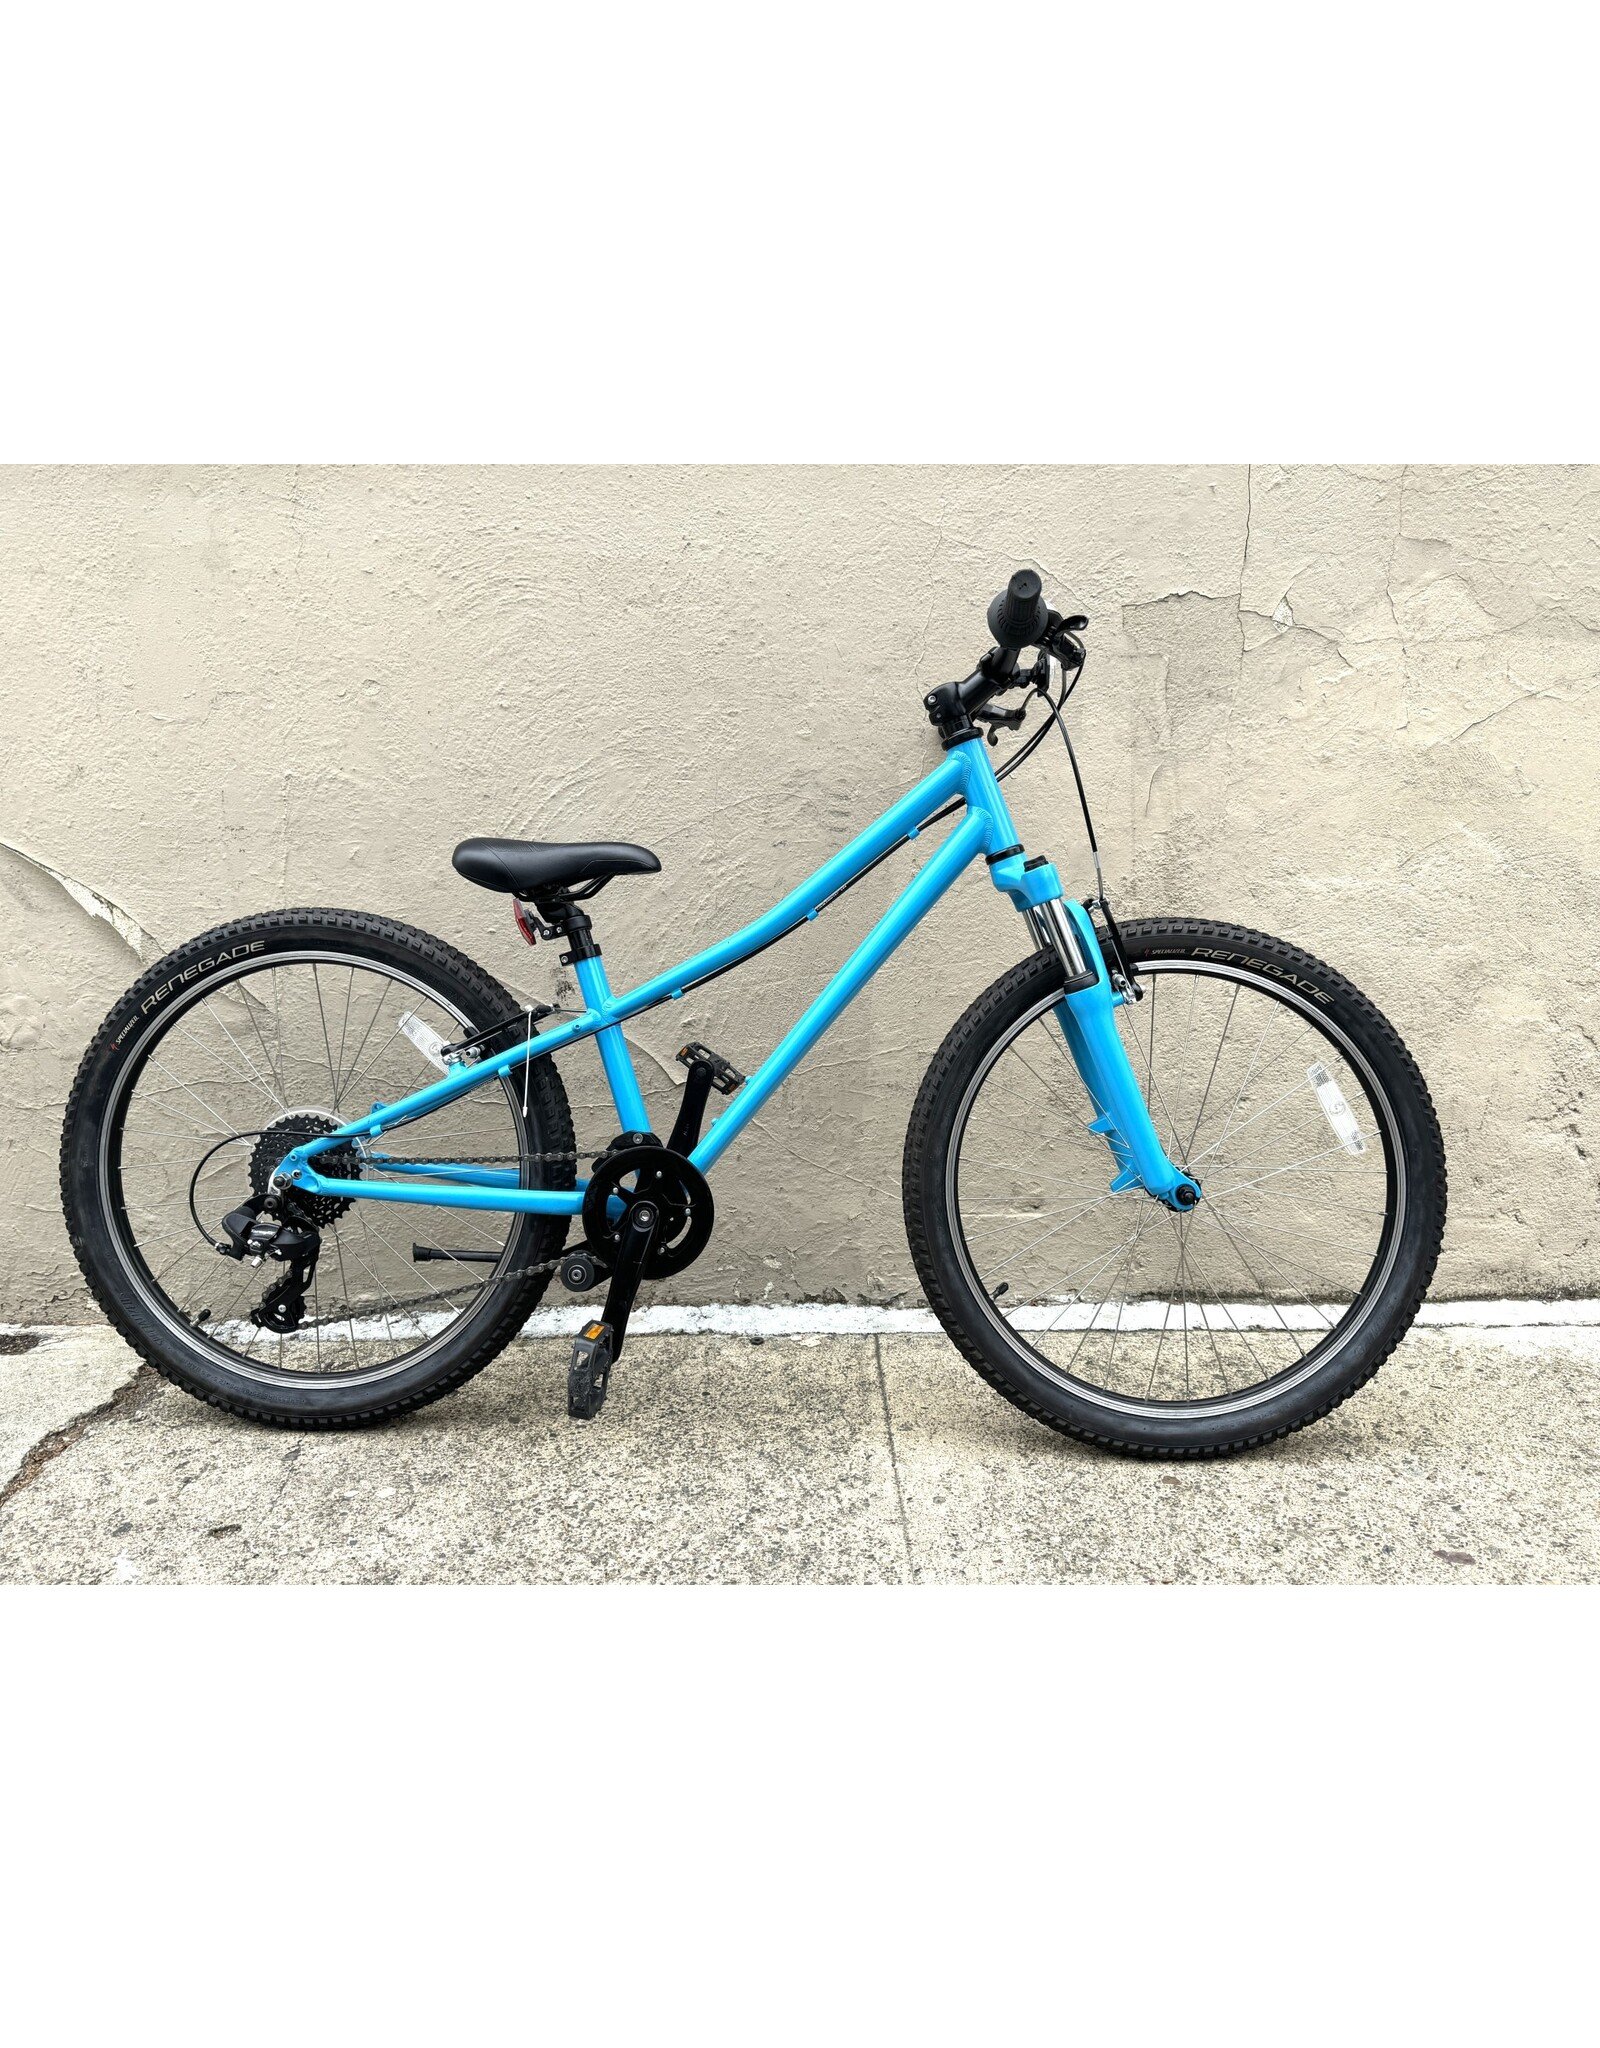 Specialized Specialized Hotrock 24 Youth,  12 Inches, Teal